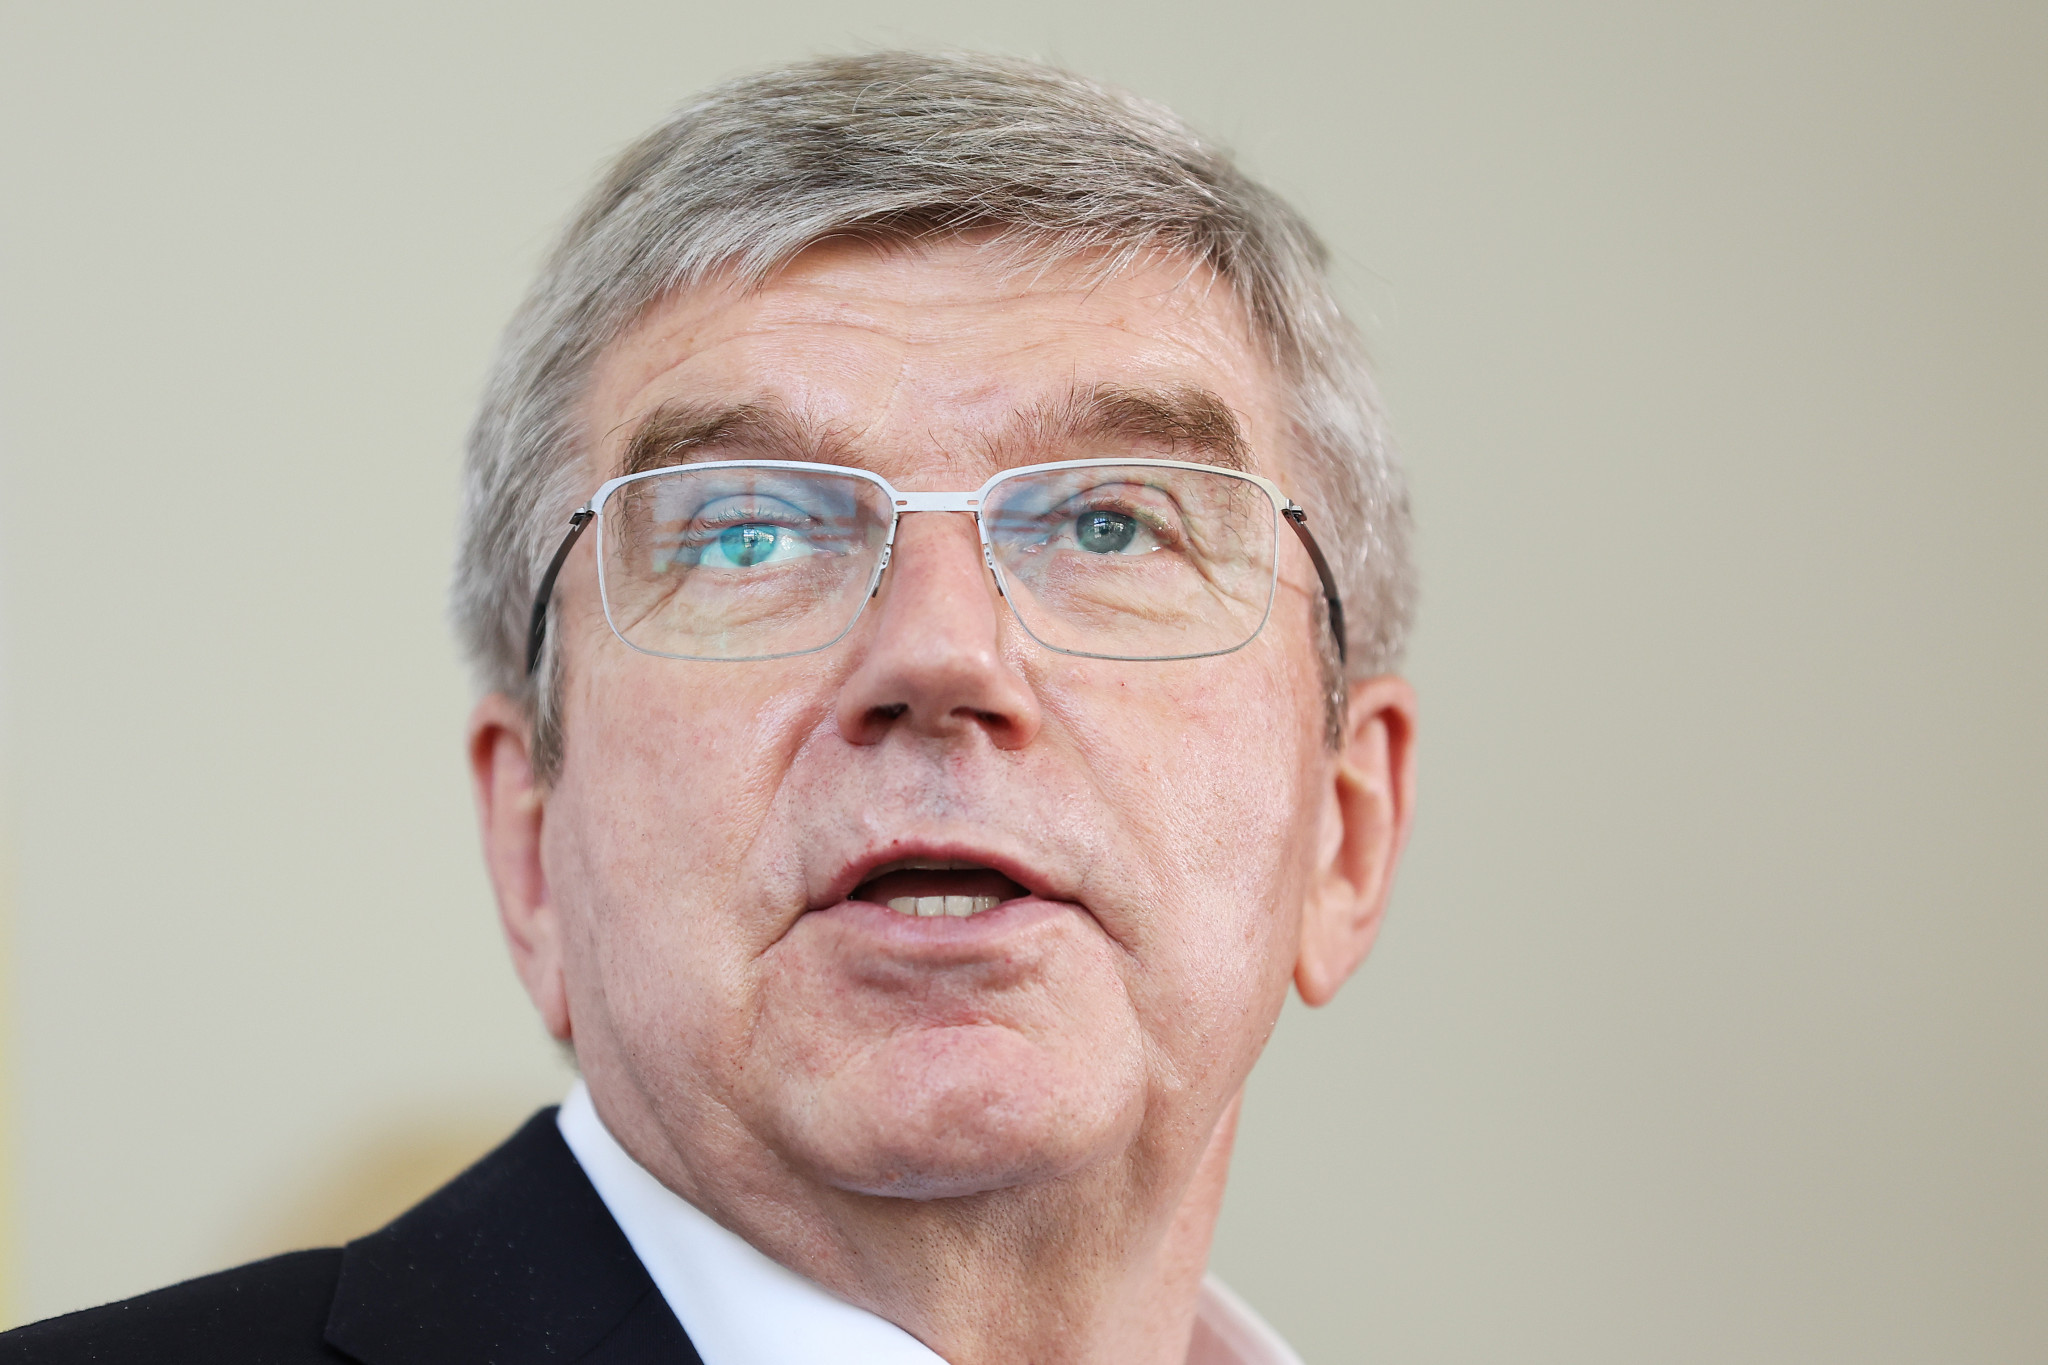 IOC President Thomas Bach has said the IOC will not budge on Russia or Belarus for now ©Getty Images